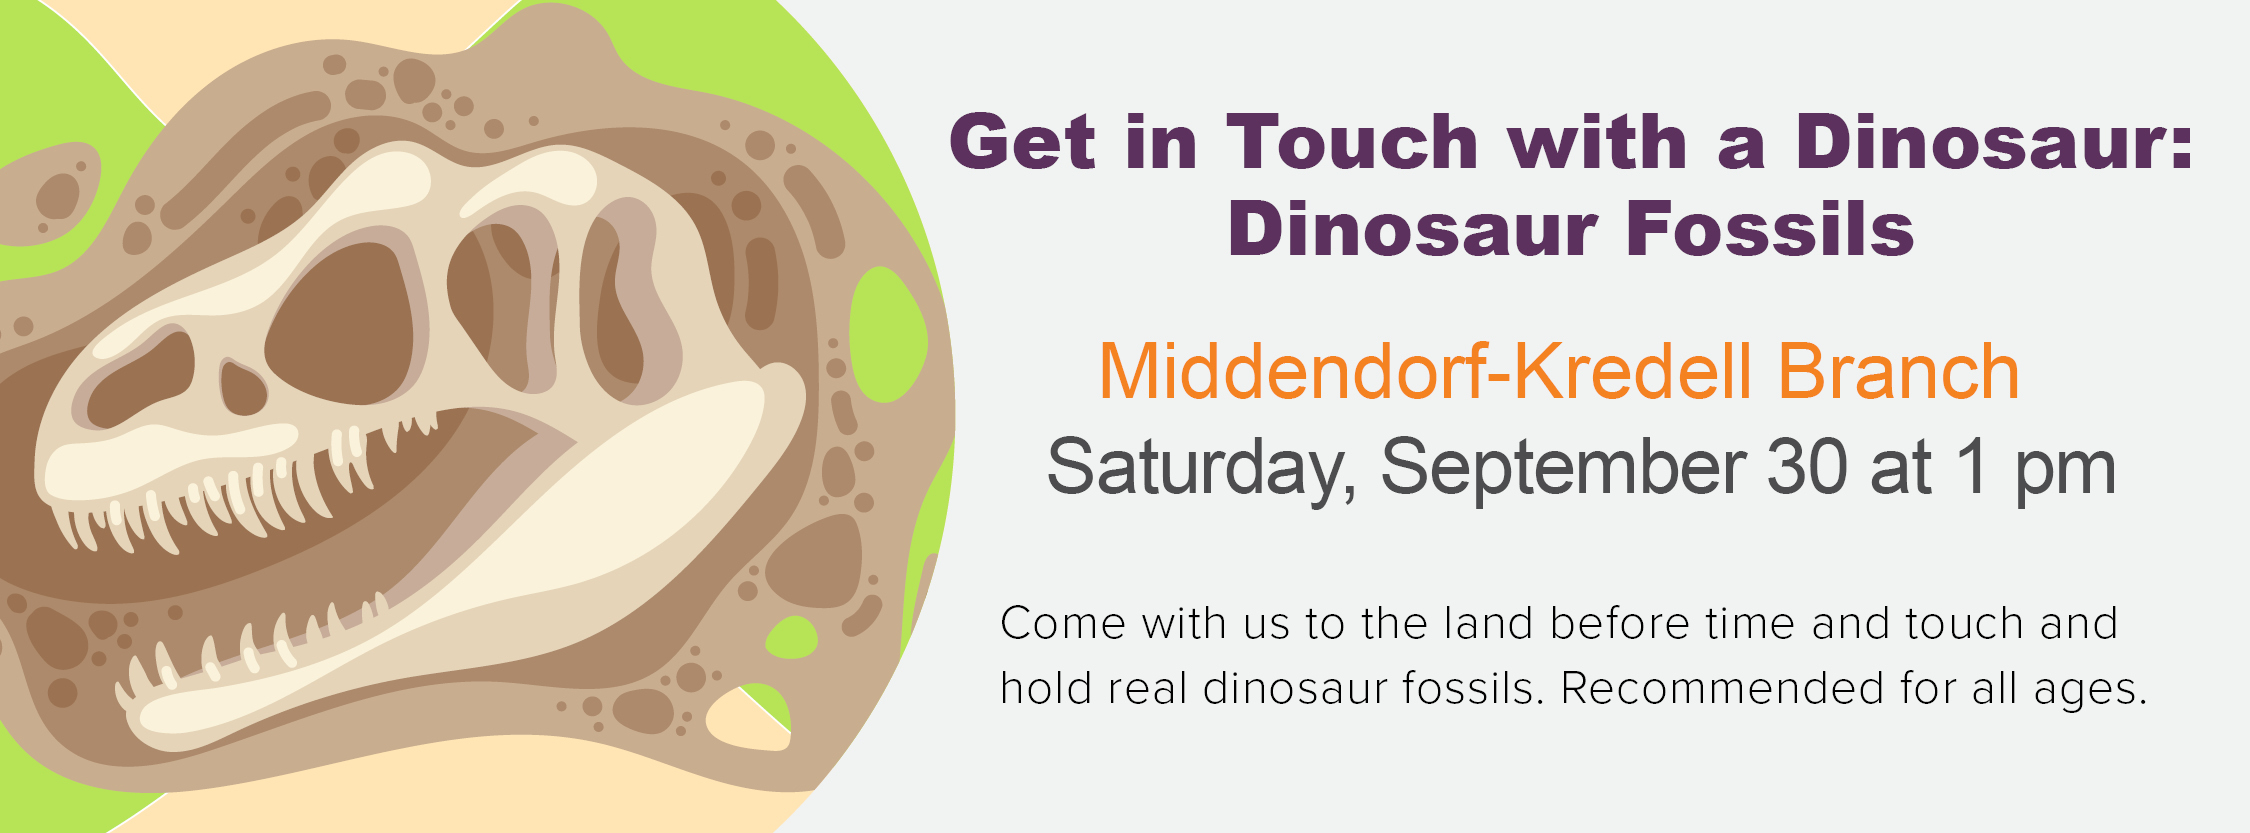 Get in Touch with a Dinosaur at Middendorf-Kredell Branch